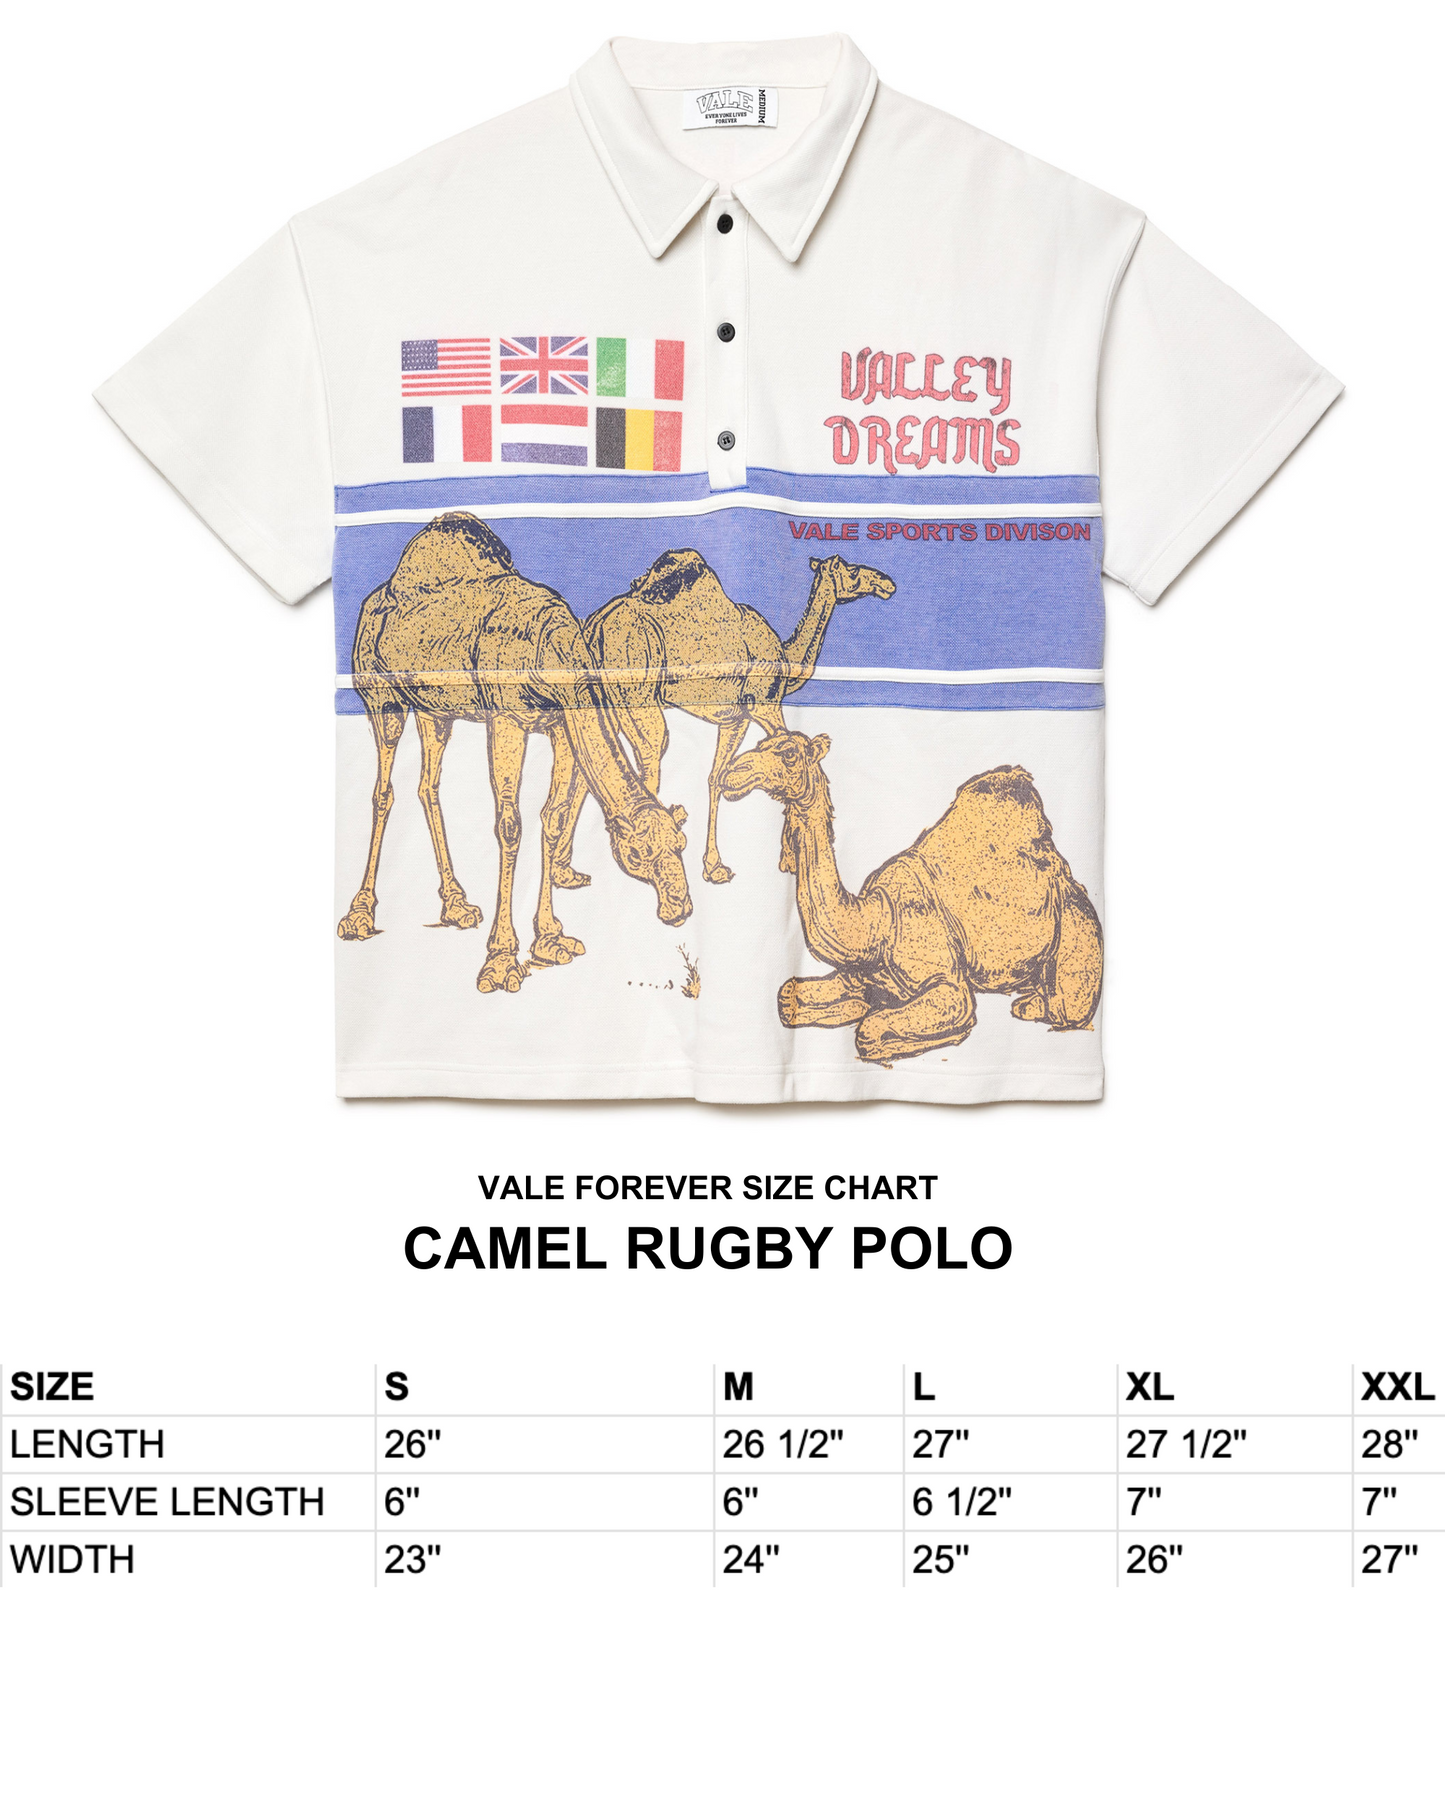 CAMEL RUGBY POLO